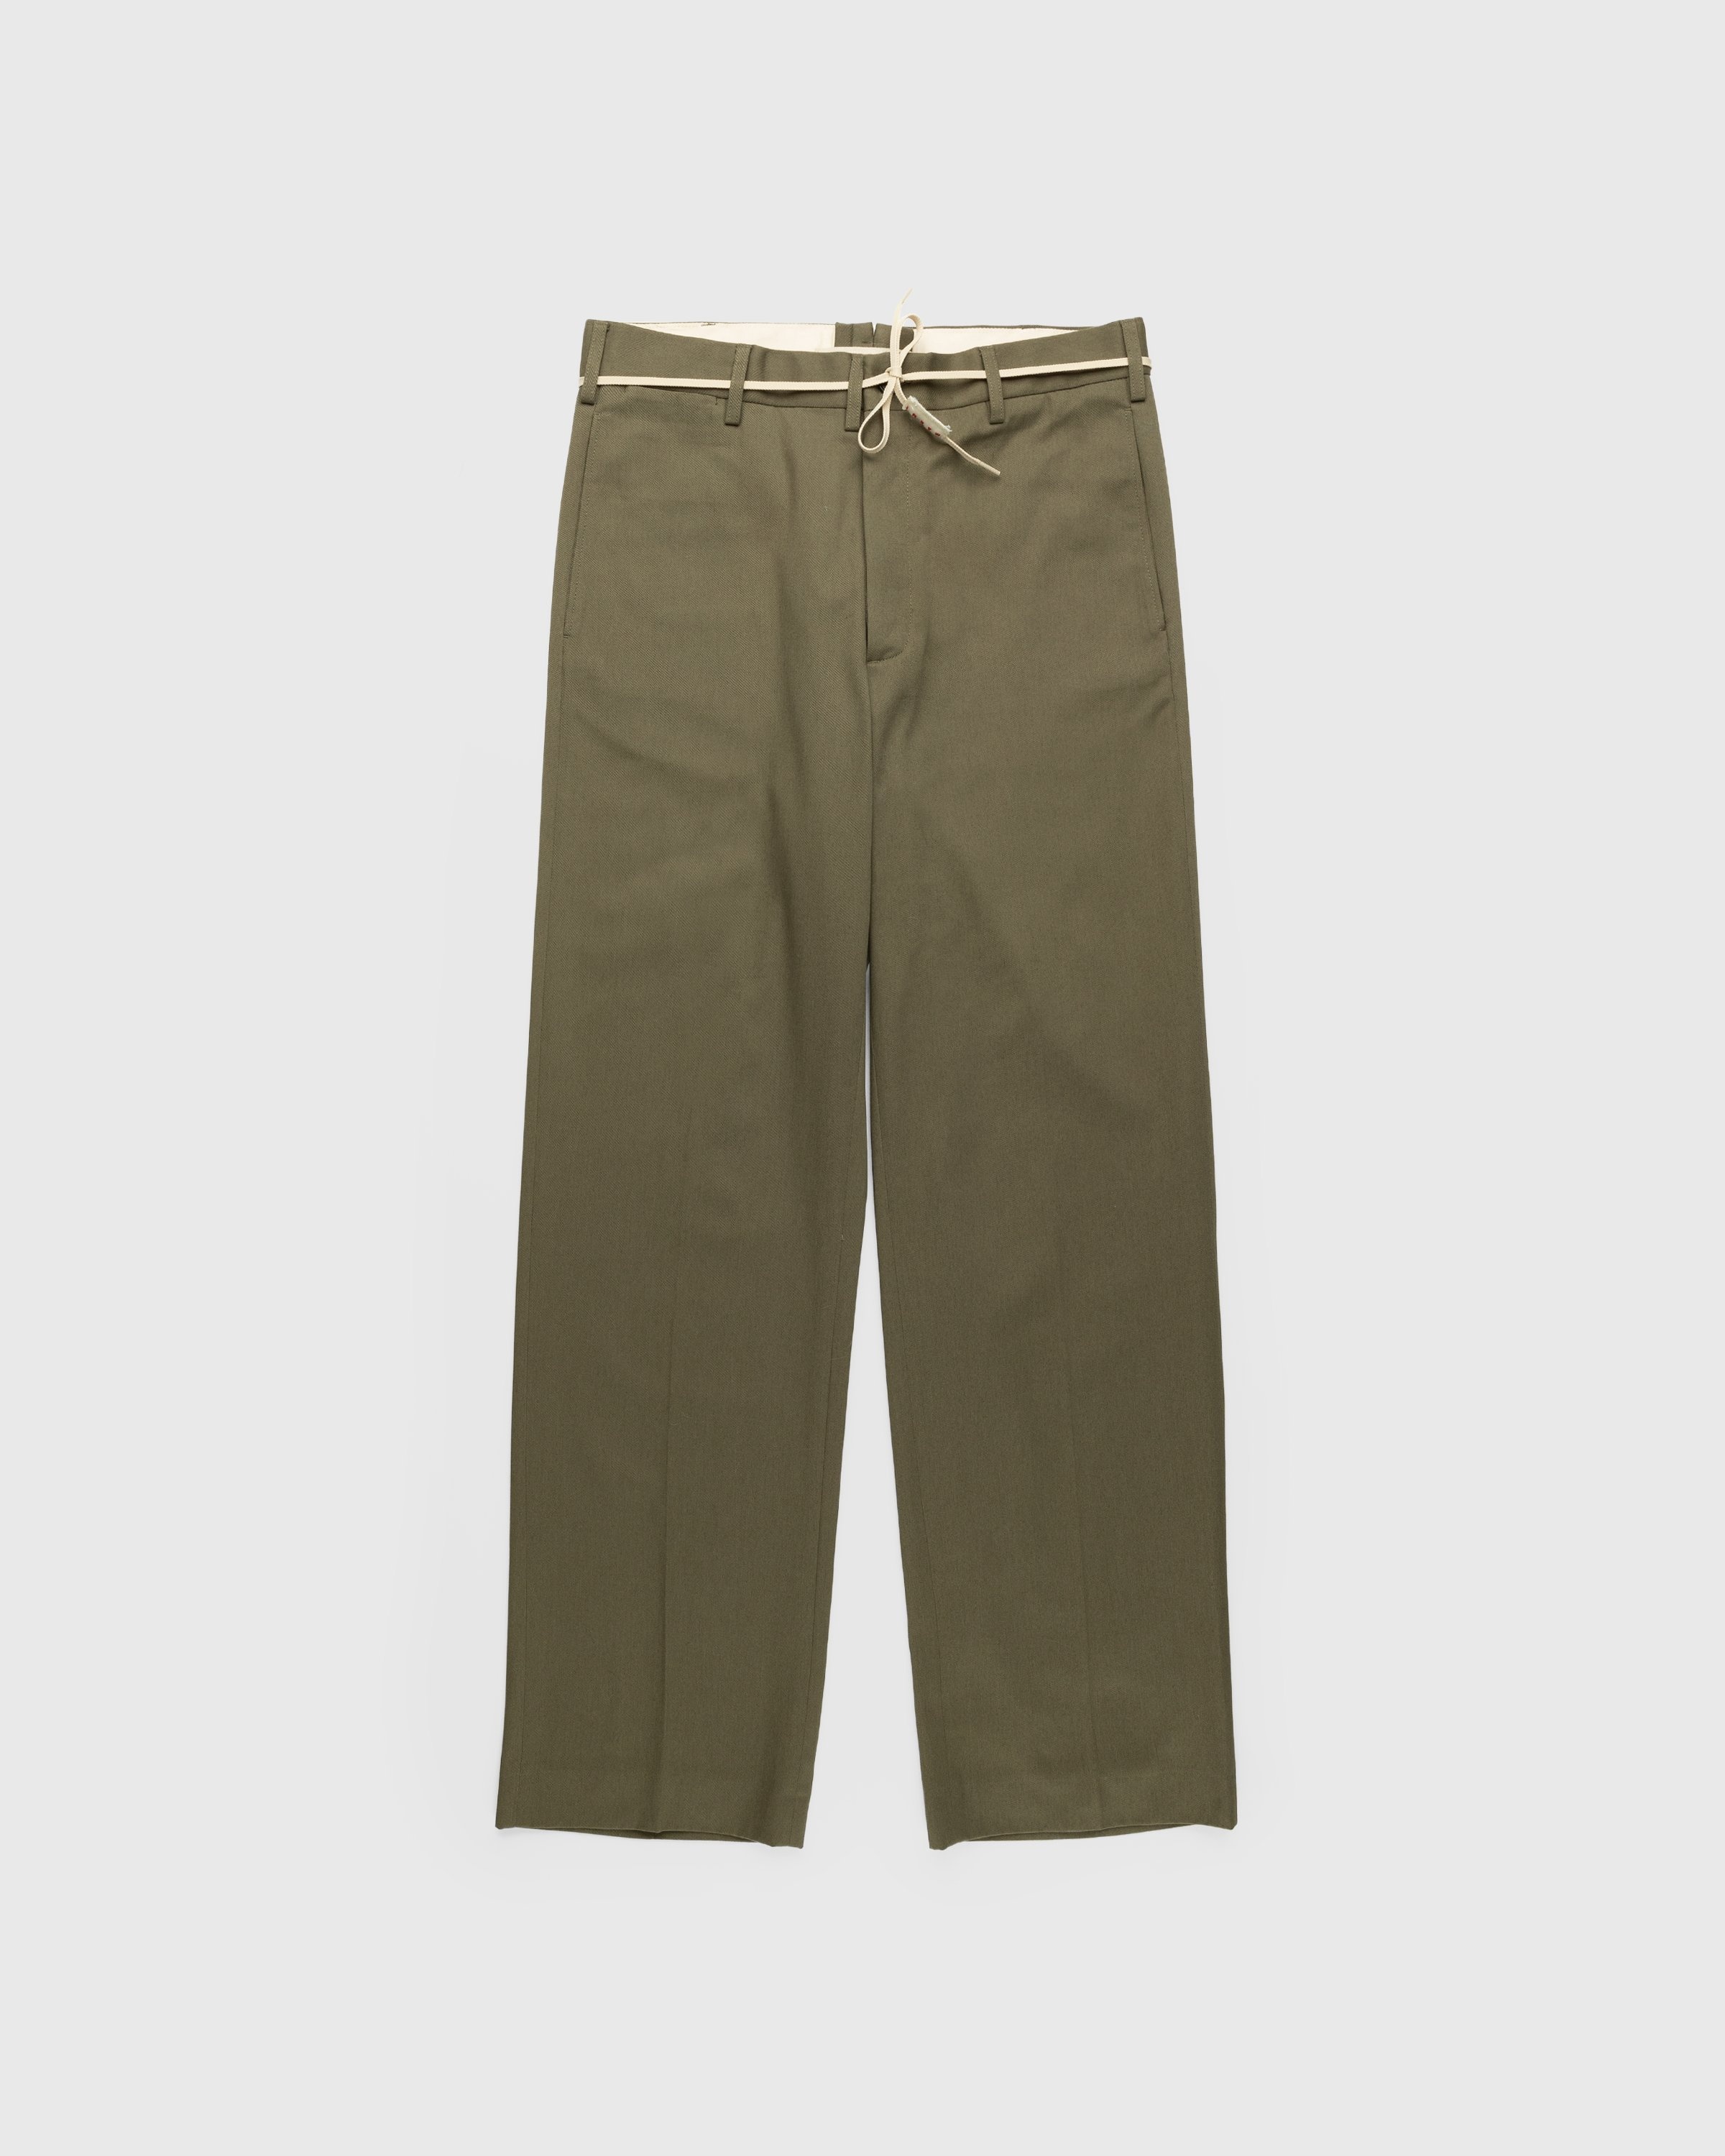 Marni – Gabardine Cotton Cropped Trousers Stone Green - Trousers - Green - Image 1